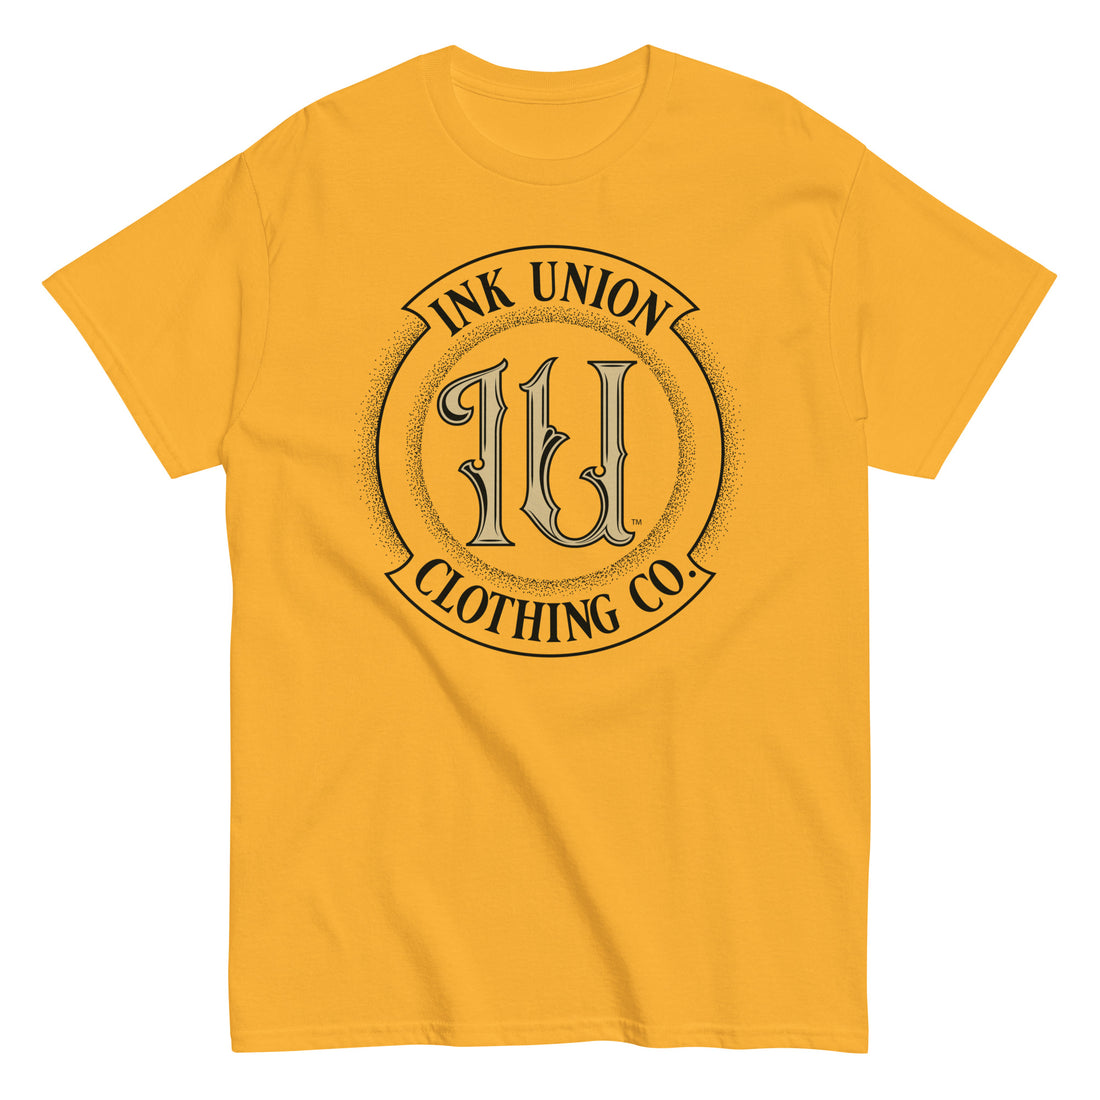 A yellow t-shirt with the Ink Union Clothing Co Badge logo in black and gold centered on the front of the shirt.